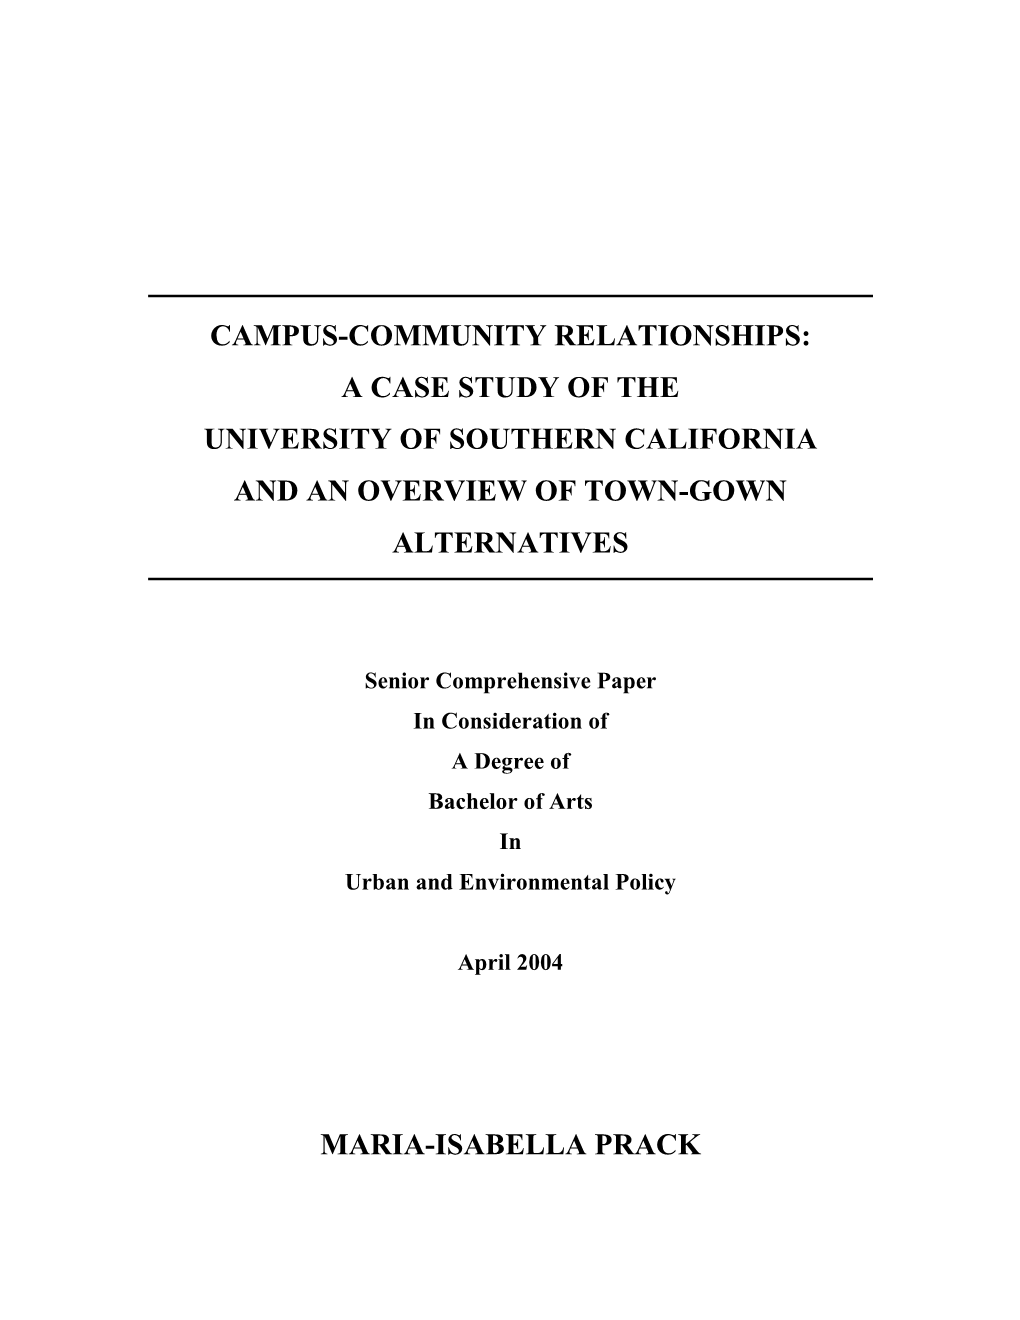 Campus-Community Relationships: a Case Study of the University of Southern California and an Overview of Town-Gown Alternatives